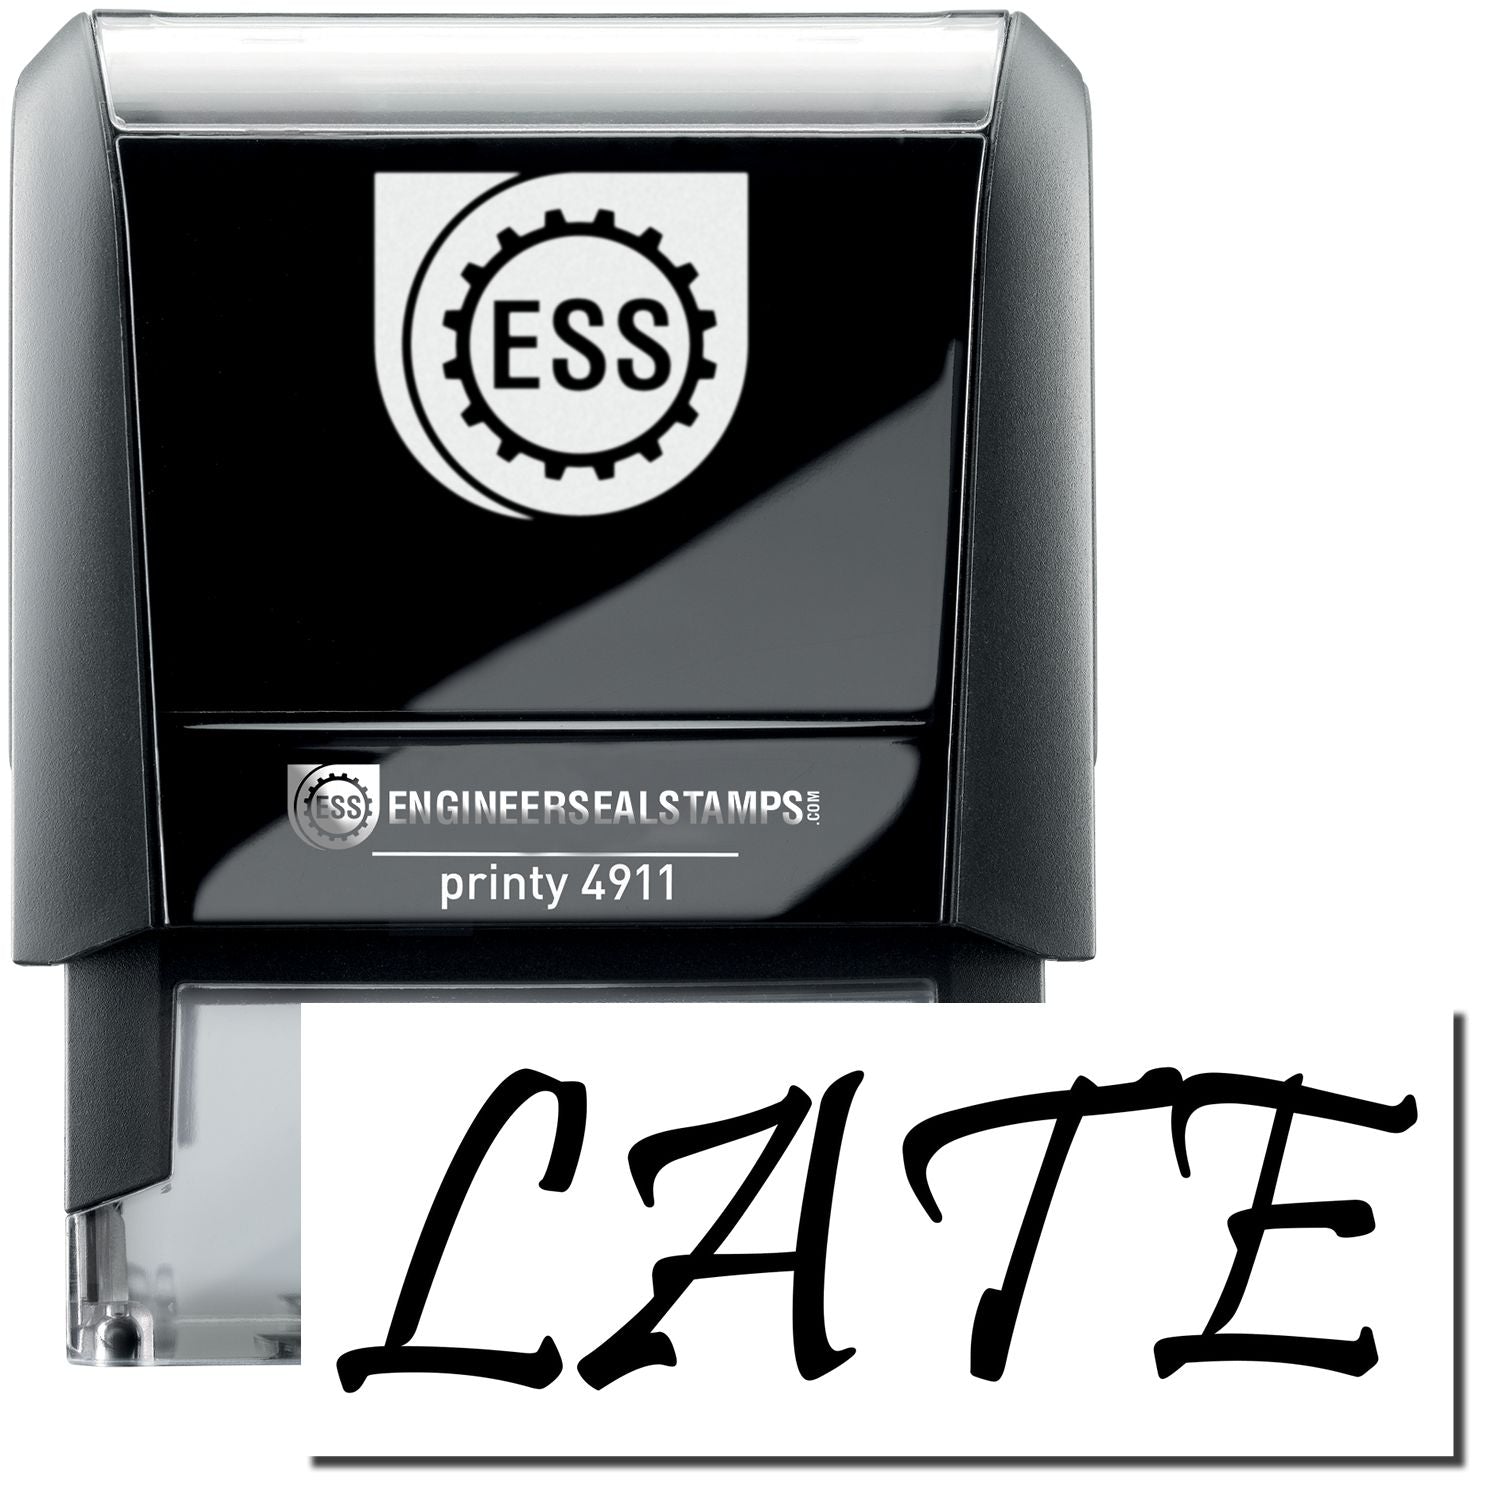 A self-inking stamp with a stamped image showing how the text "LATE" is displayed after stamping.